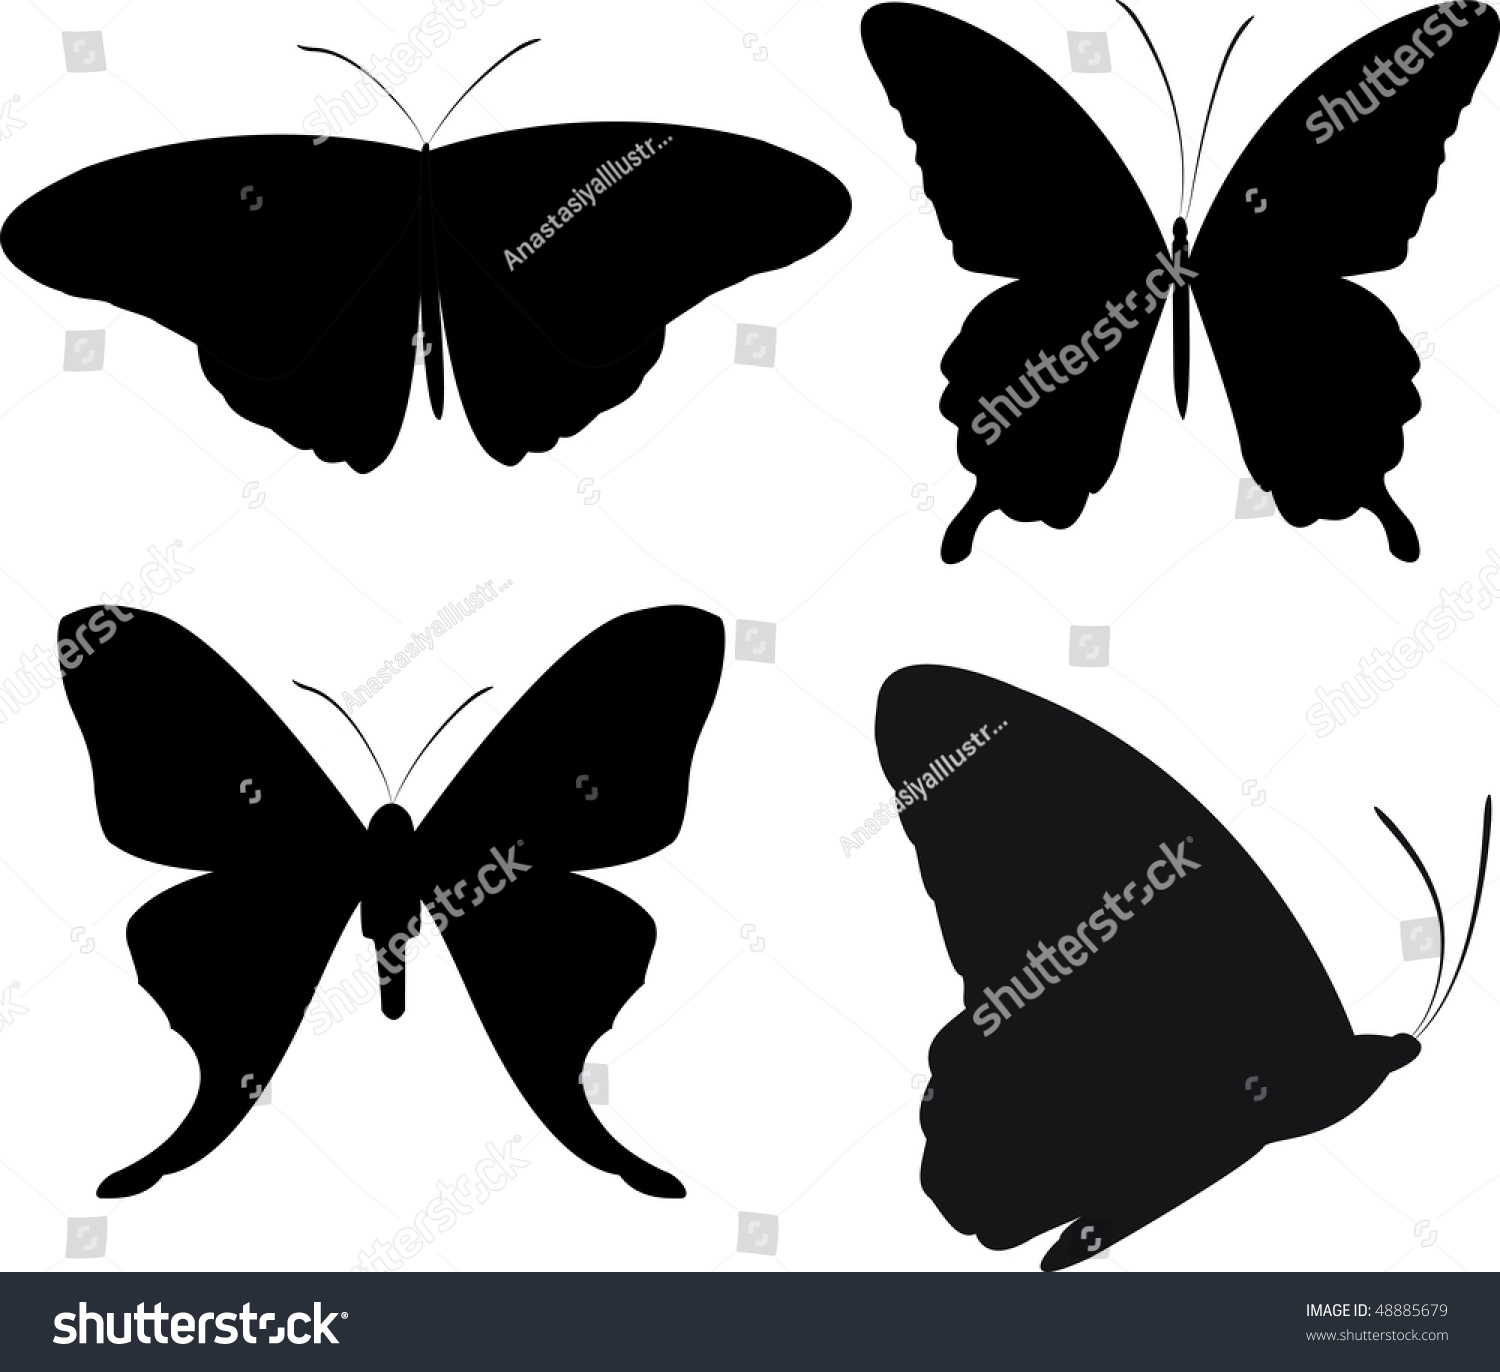 Download Four Simple Butterfly Silhouette Shapes Stock Vector ...